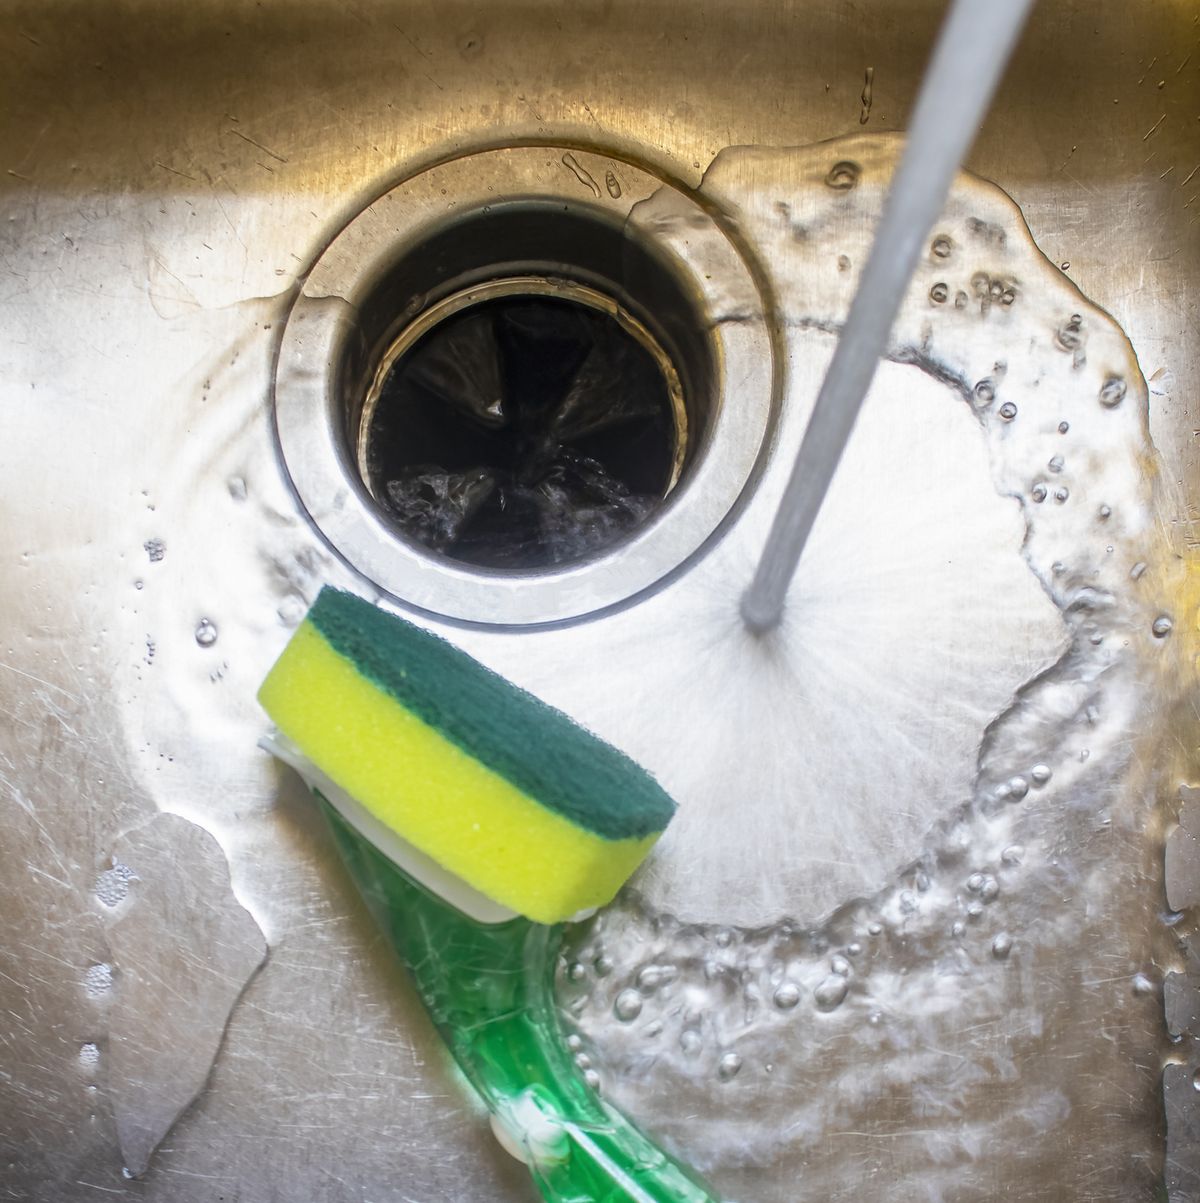 How to Deodorize and Clean a Garbage Disposal